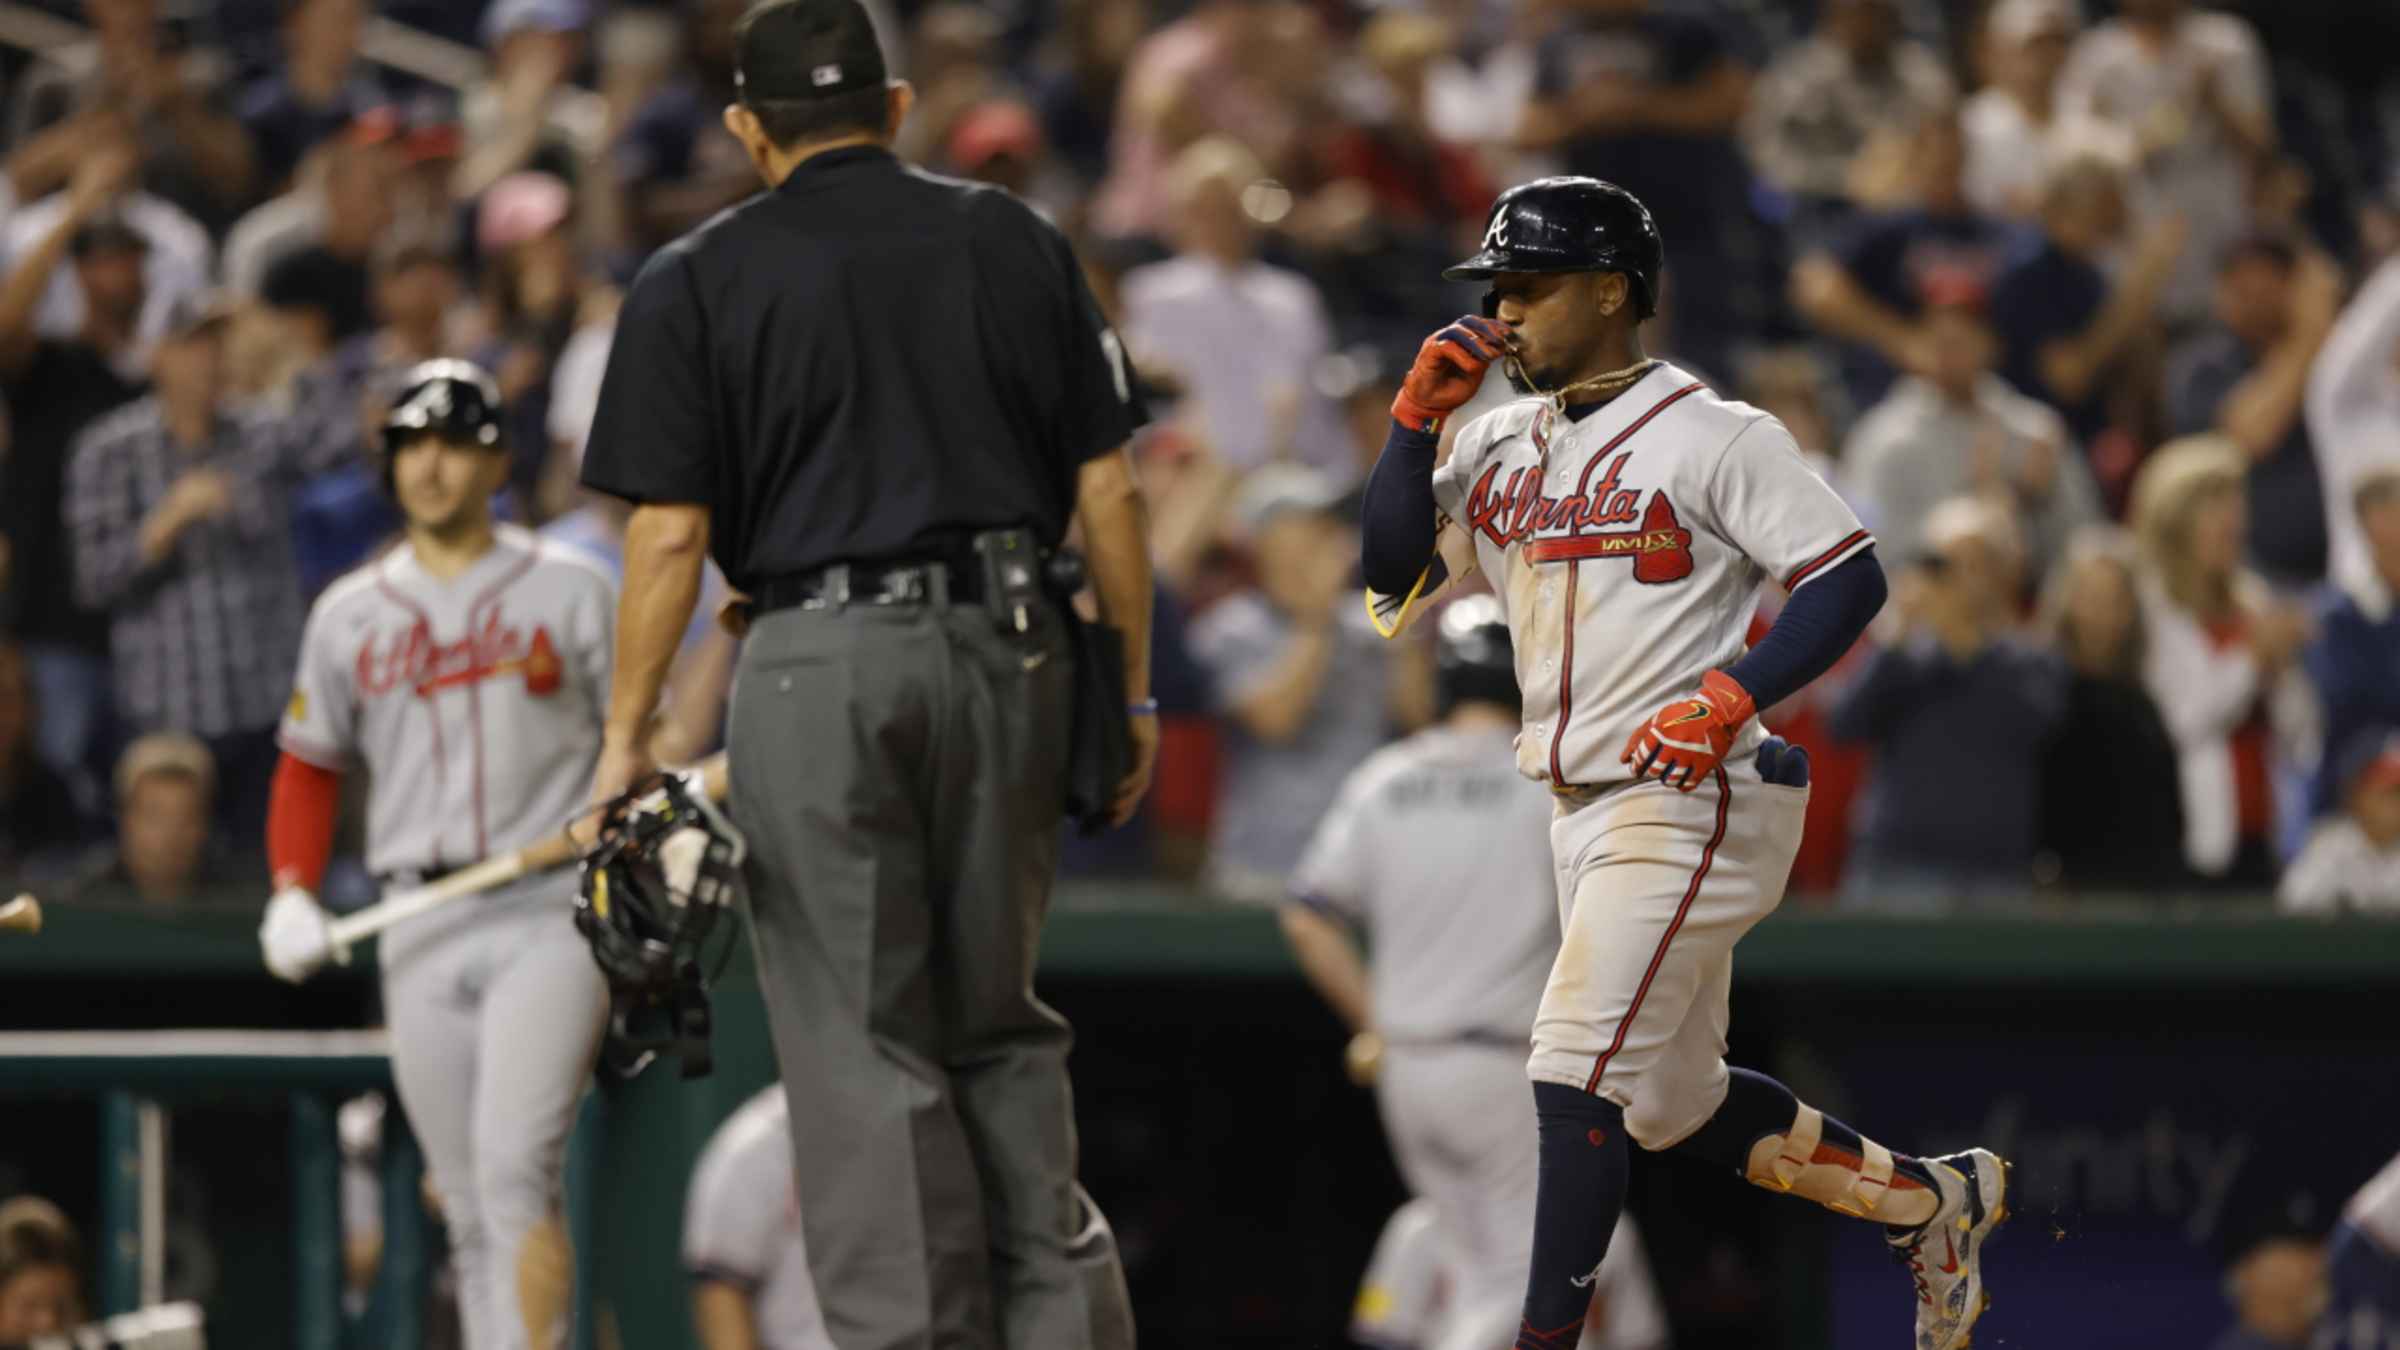 Braves 2B Ozzie Albies takes important step towards return from hamstring  injury